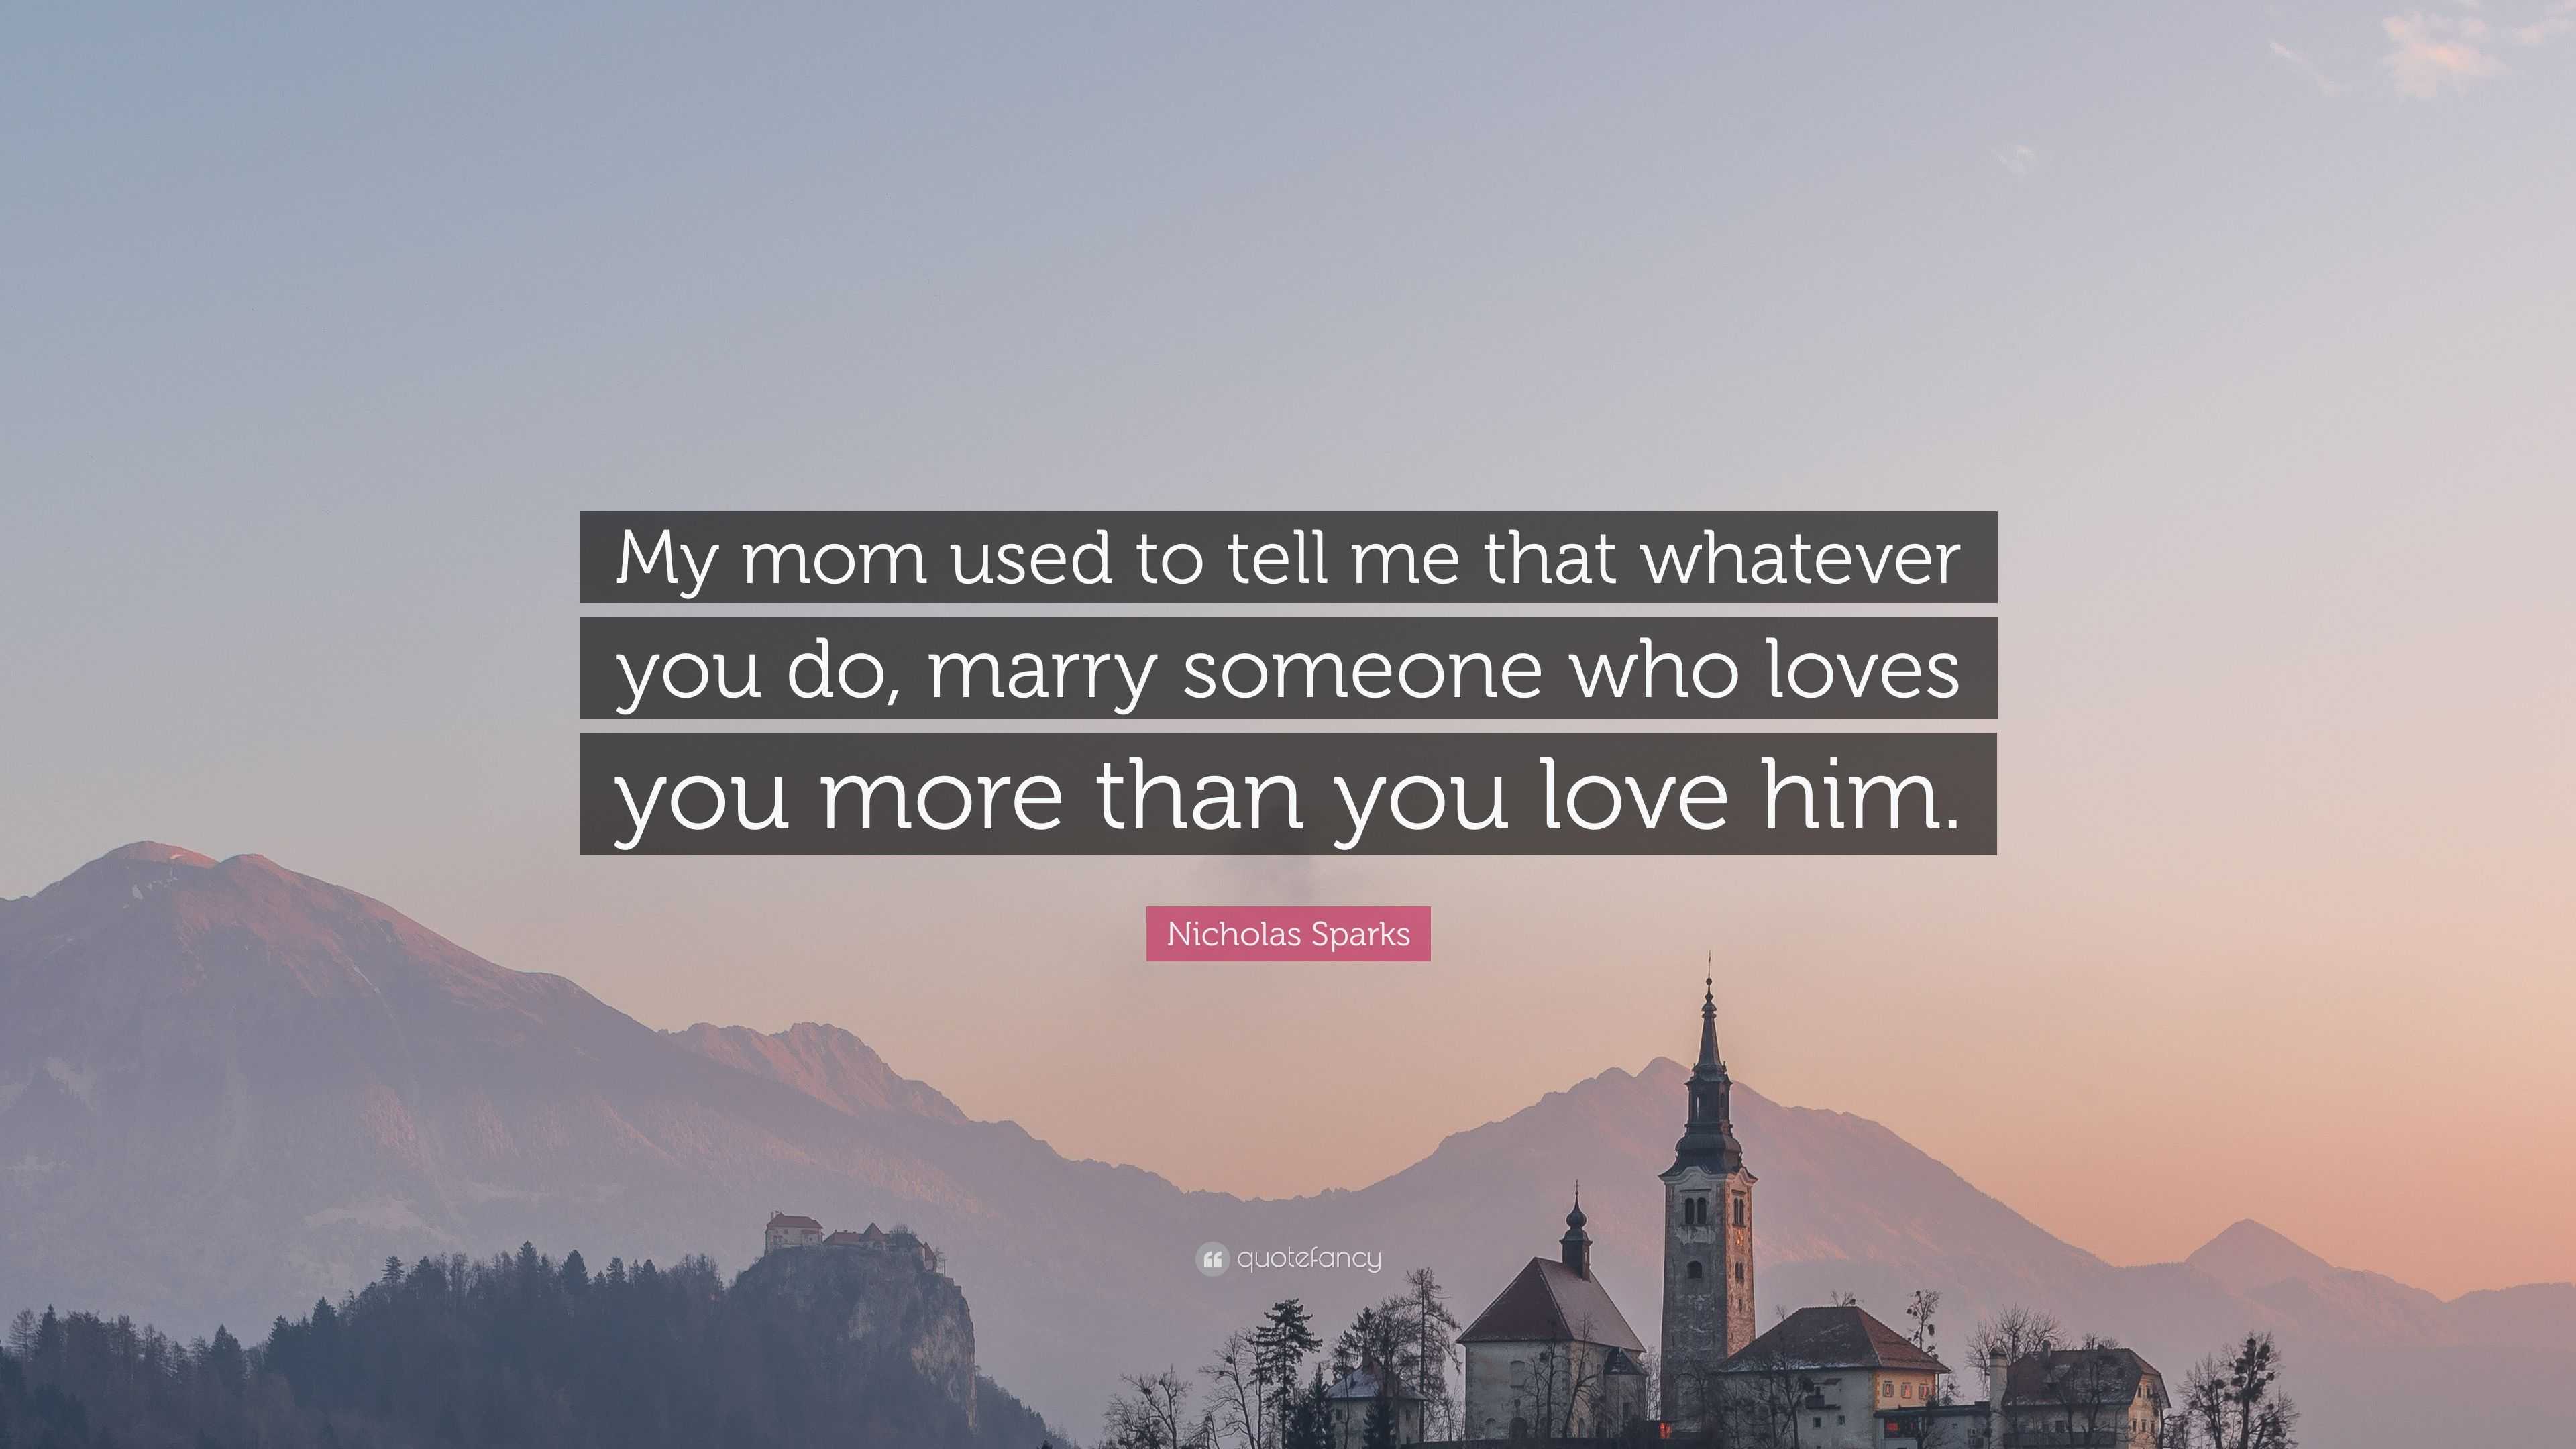 Nicholas Sparks Quote “My mom used to tell me that whatever you do